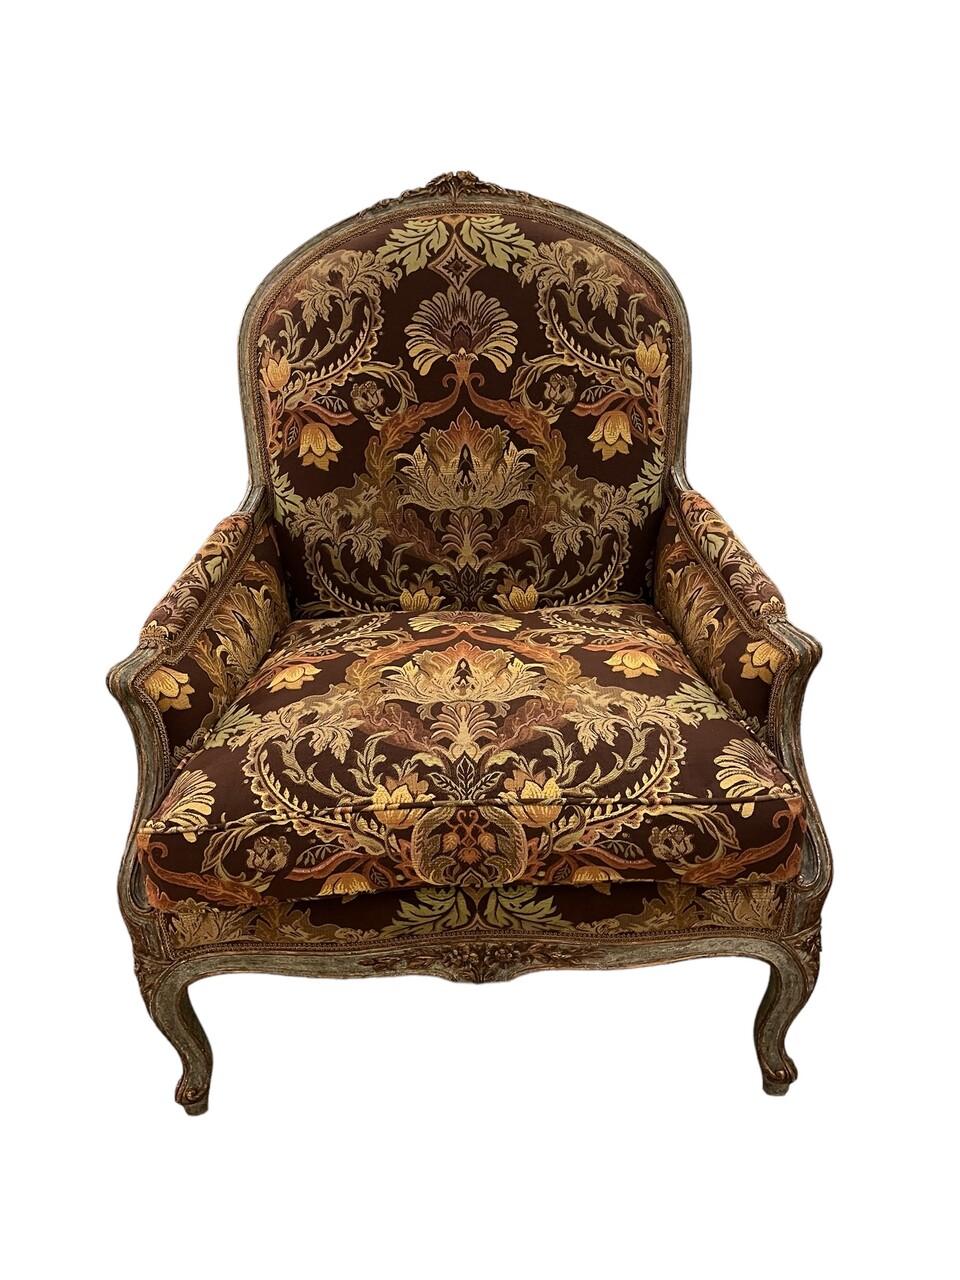 Elevate your living space with a timeless touch of elegance courtesy of this exquisite pair of Minton-Spidell Louis XV style Bergere Chairs. Crafted with meticulous attention to detail, each chair features sumptuous damask fabric upholstery that